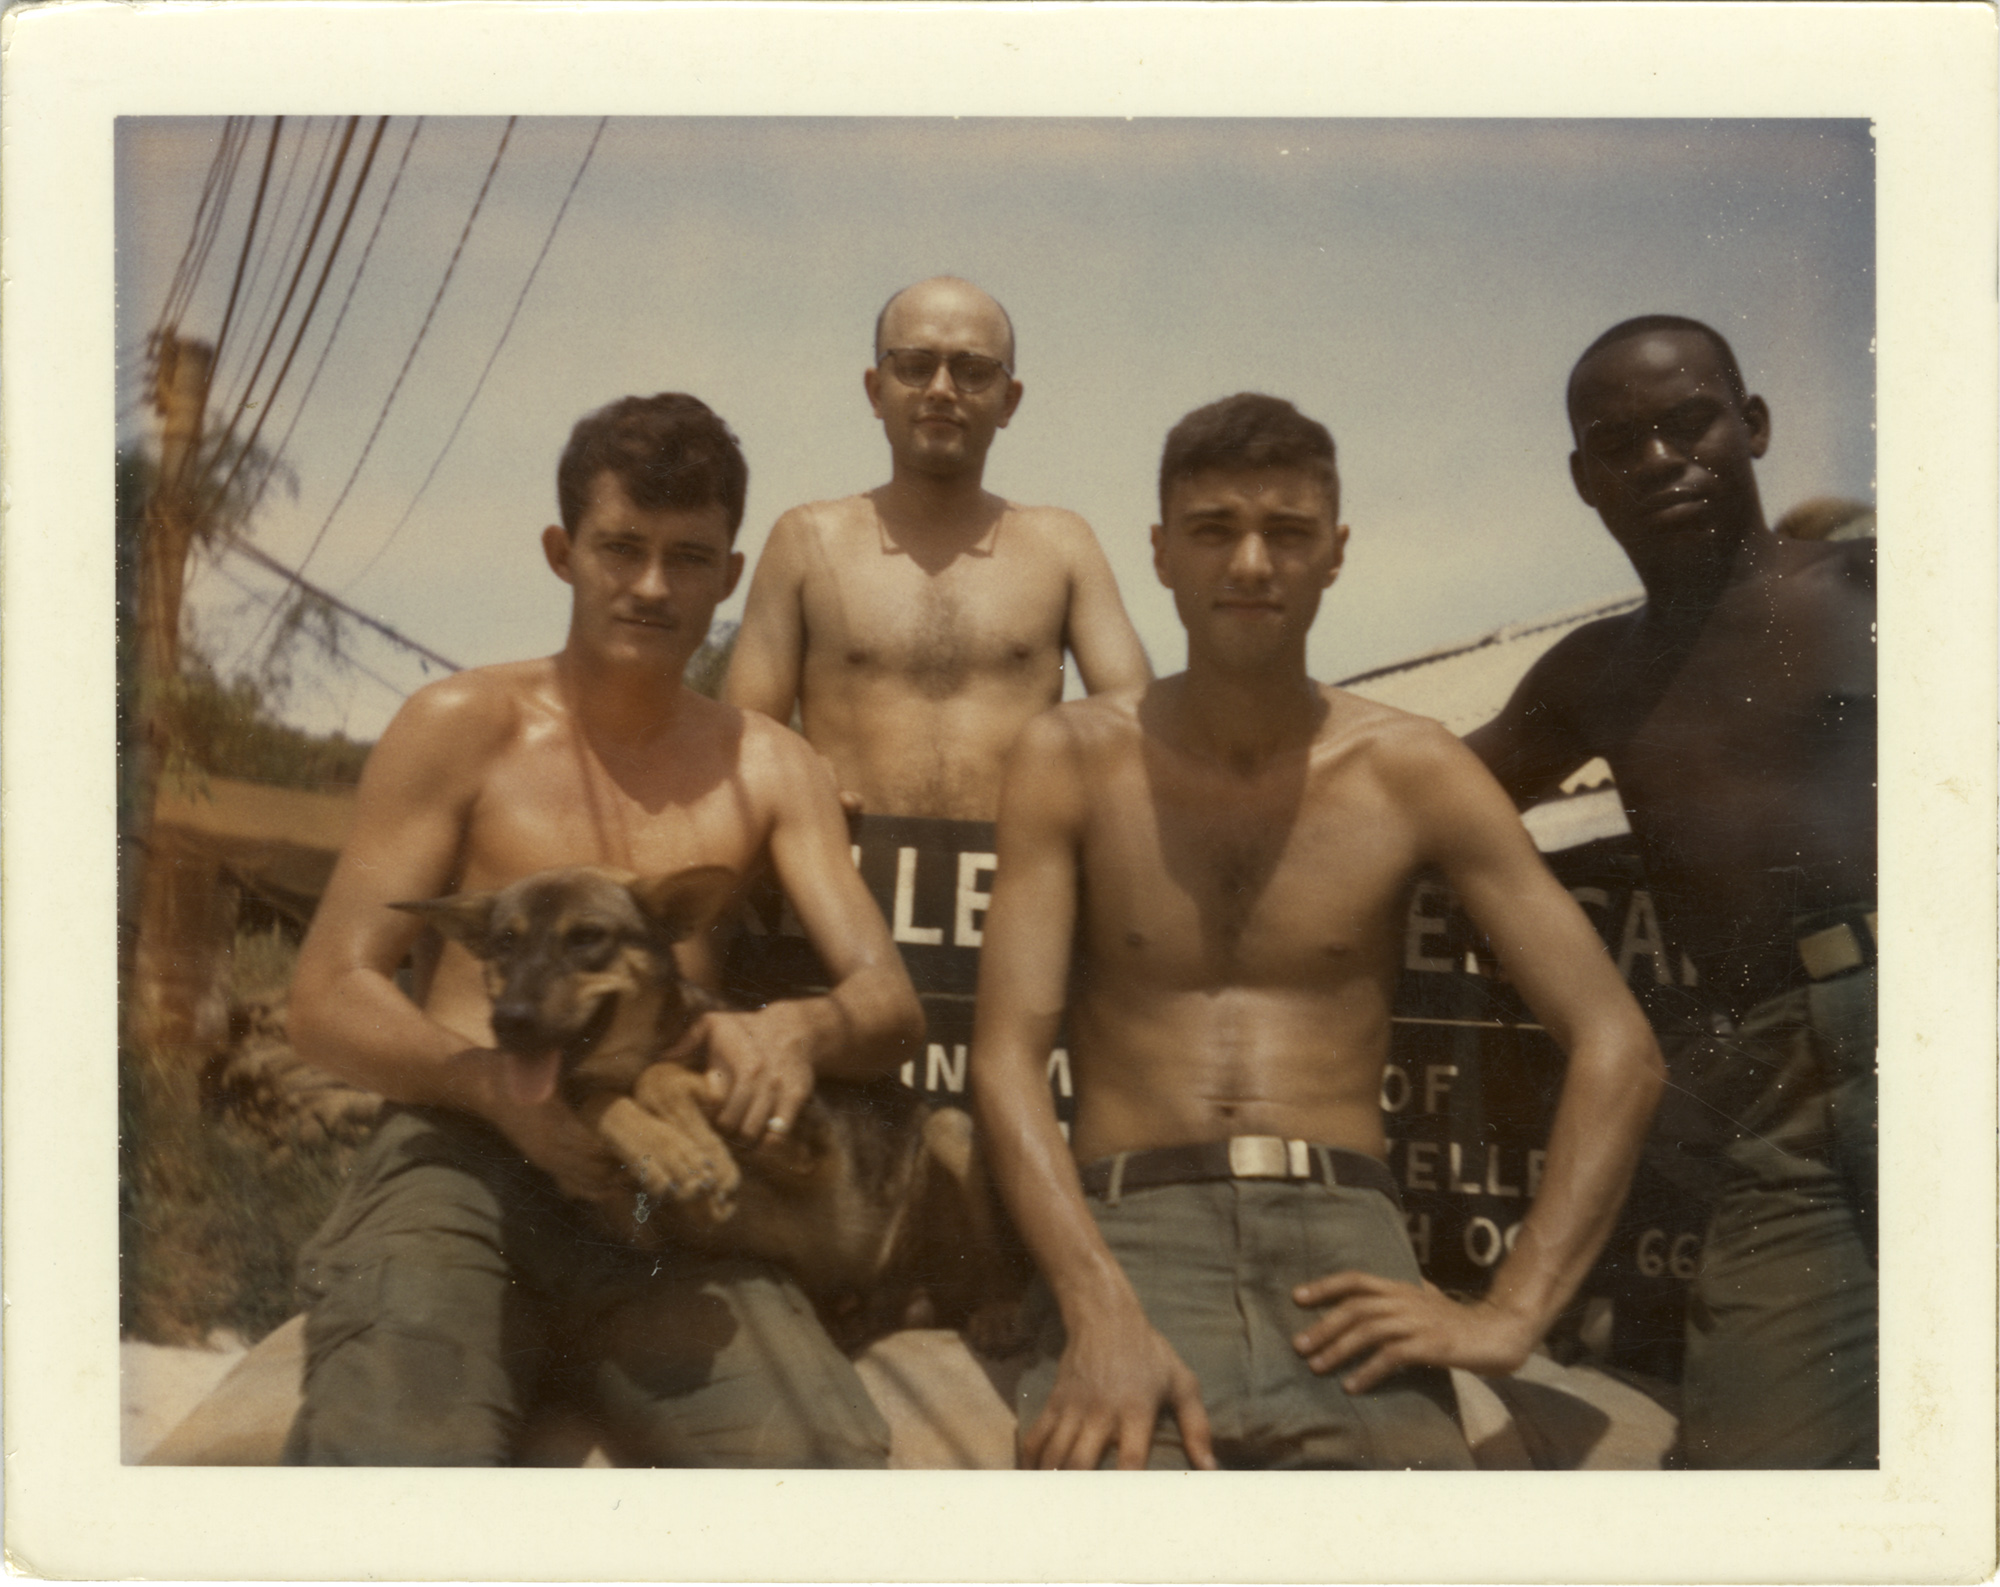 Four soldiers without shirts and wearing military green fatigue pants sit holding a small dog